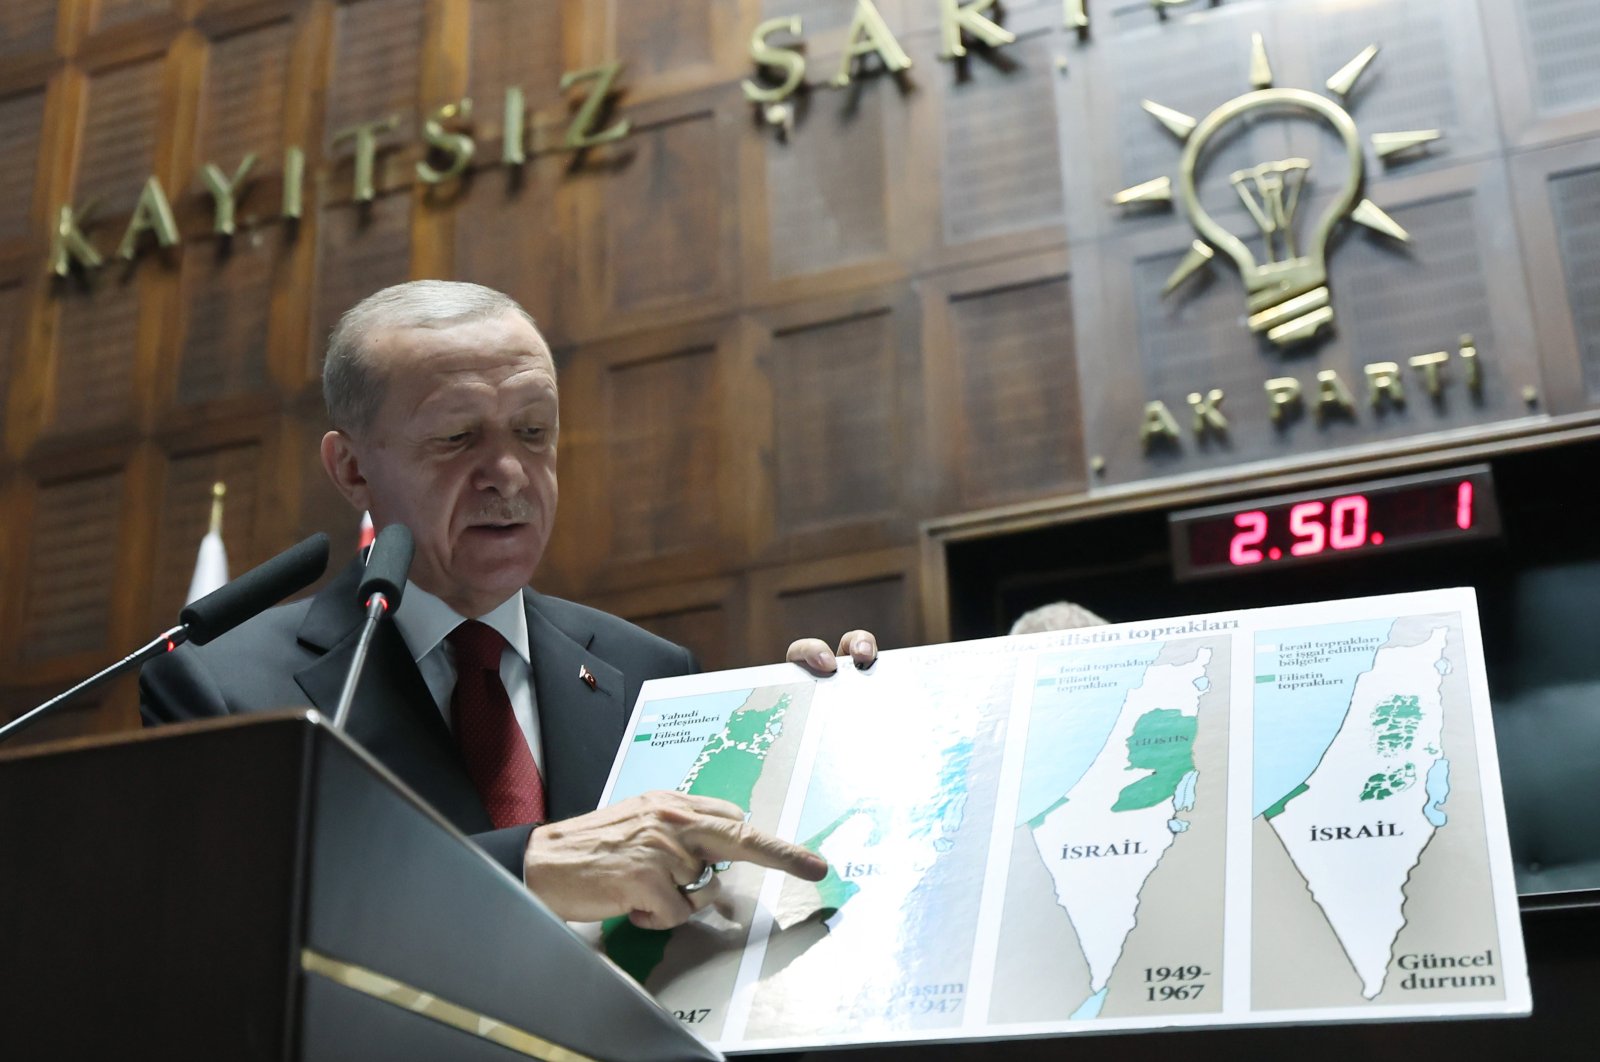 President Recep Tayyip Erdoğan shows a map of Palestinian territories occupied by Israel during his speech at the Justice and Development Party (AK Party) group parliamentary meeting in the capital Ankara, Türkiye, Oct. 11, 2023. (AA Photo)